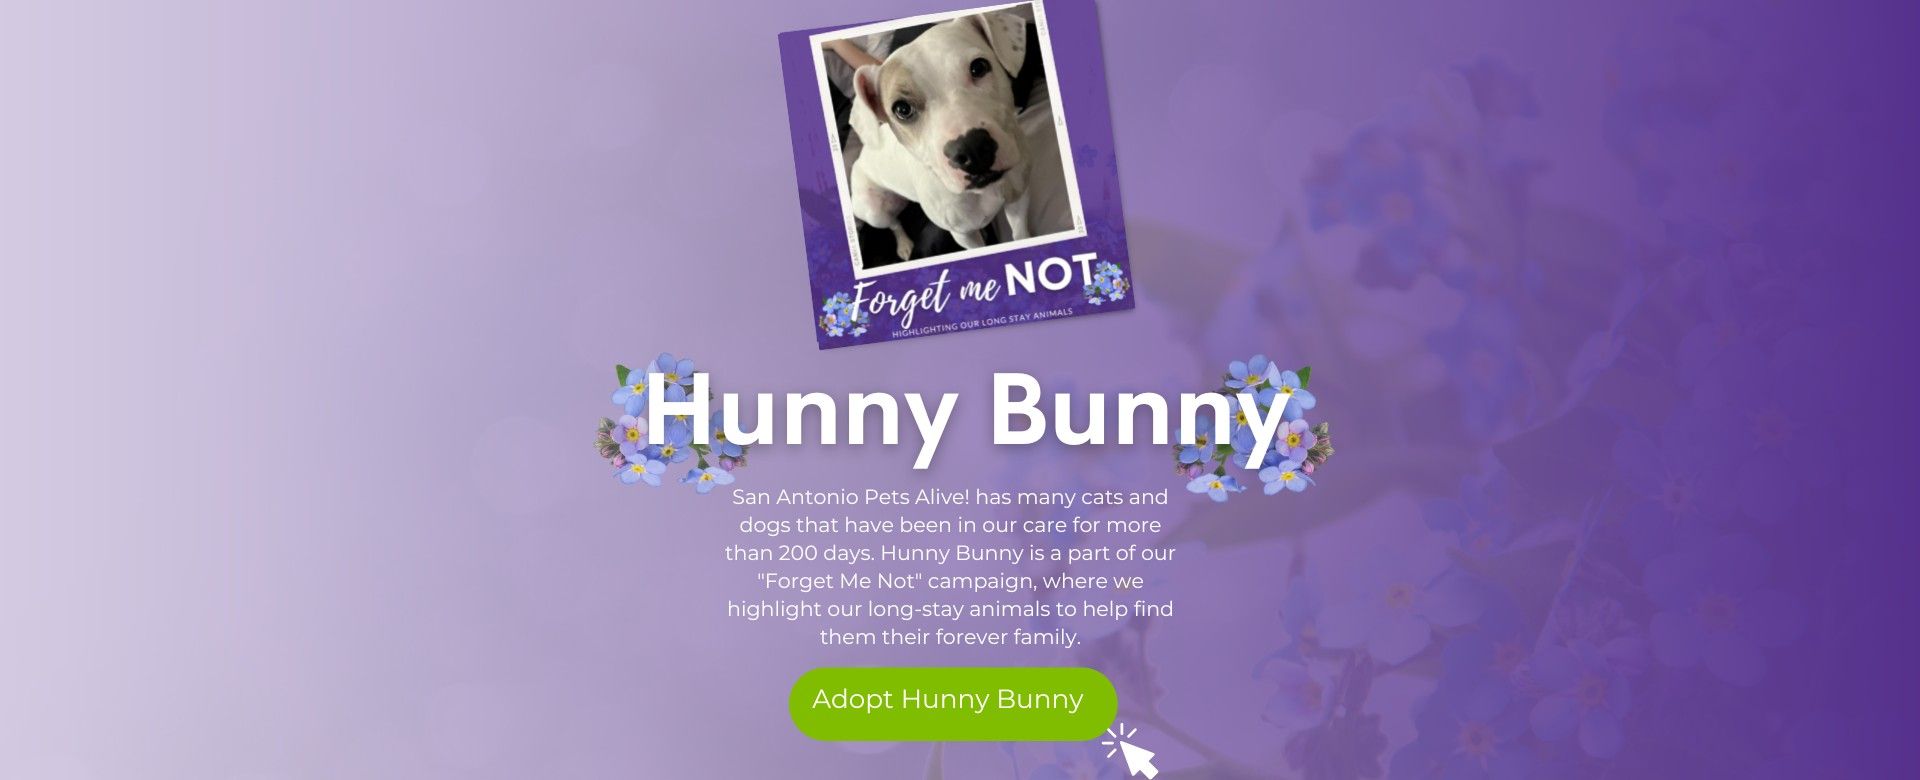 Forget Me Not - Adopt Hunny Bunny